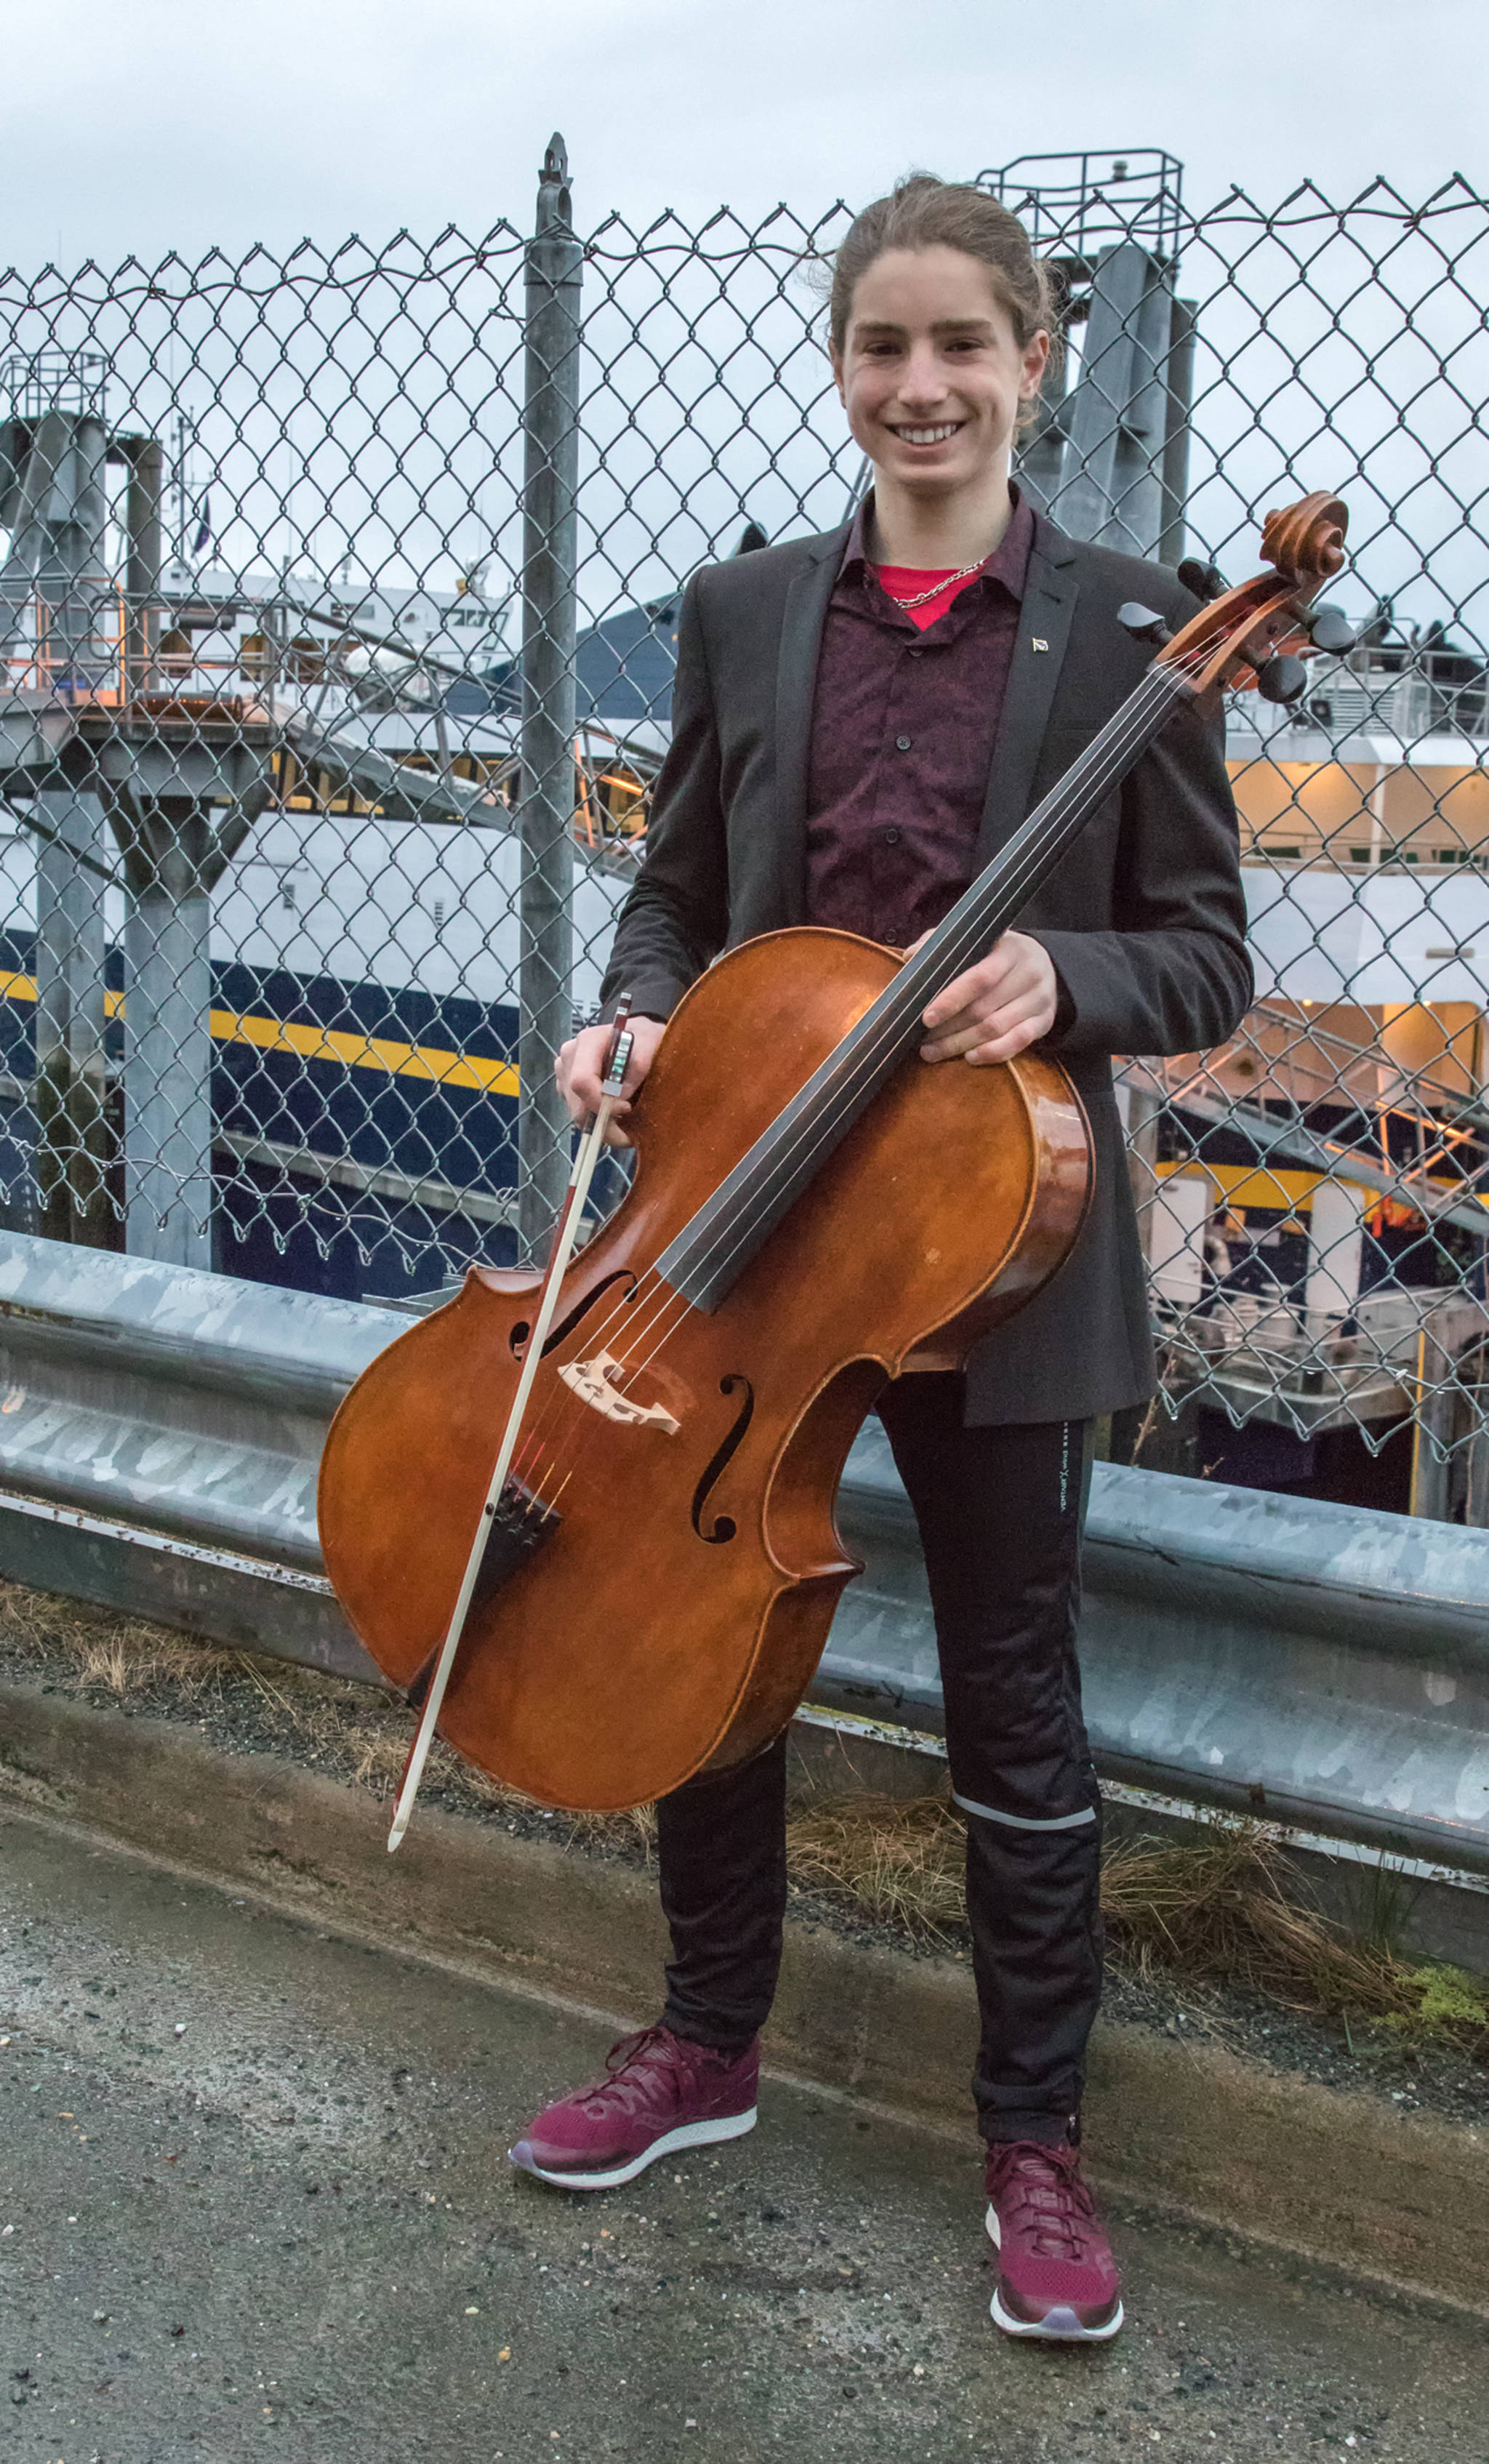 April 7, 2019: I ran into Finn Morley at an informal gathering as the Fairweather ferry departed Juneau. Finn, a 10th grader at Juneau-Douglas High School, played the “Alaska Flag Song” for the occasion. He dressed for the event in a dark gray suit jacket by Asos, burgundy button-down shirt by Express, pants by Kraft and maroon shoes by Saucony. The cello, which he played exquisitely, is from Jay Haide. He has played since the fourth grade after he got acquainted with the instrument in Ecuador.